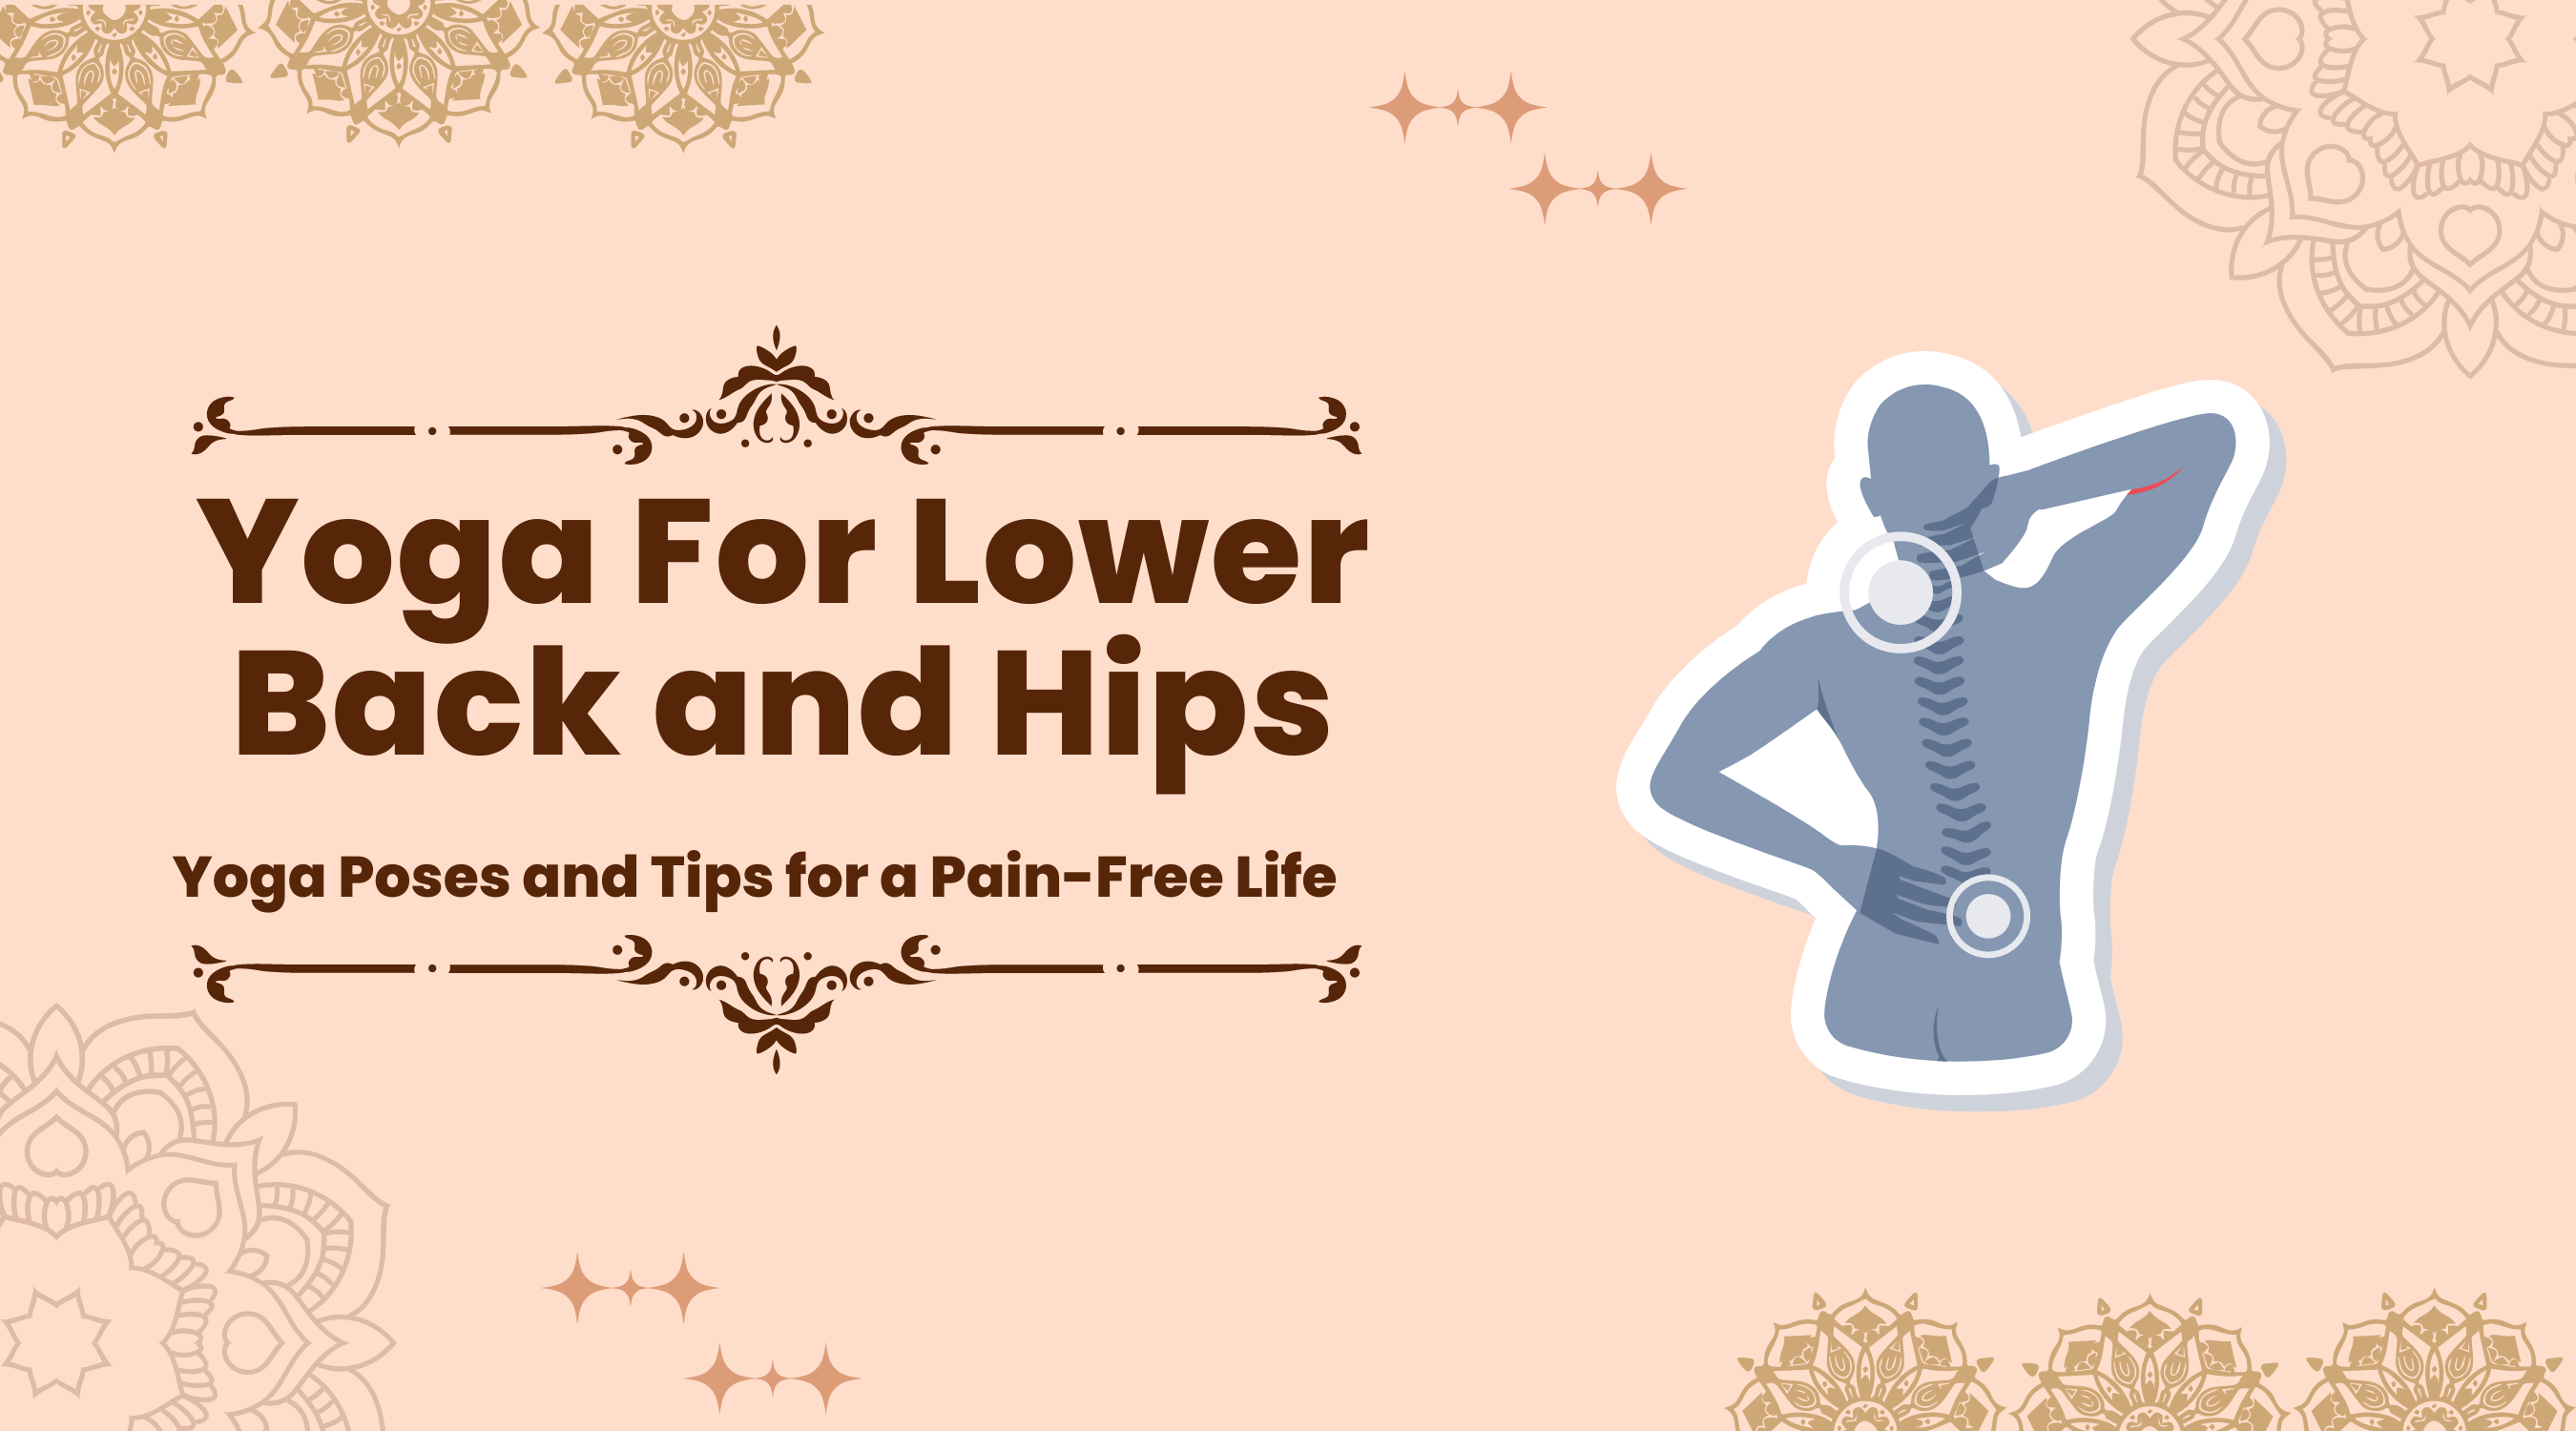 Yoga For Lower Back and Hips: Poses and Tips for a Pain-Free Life